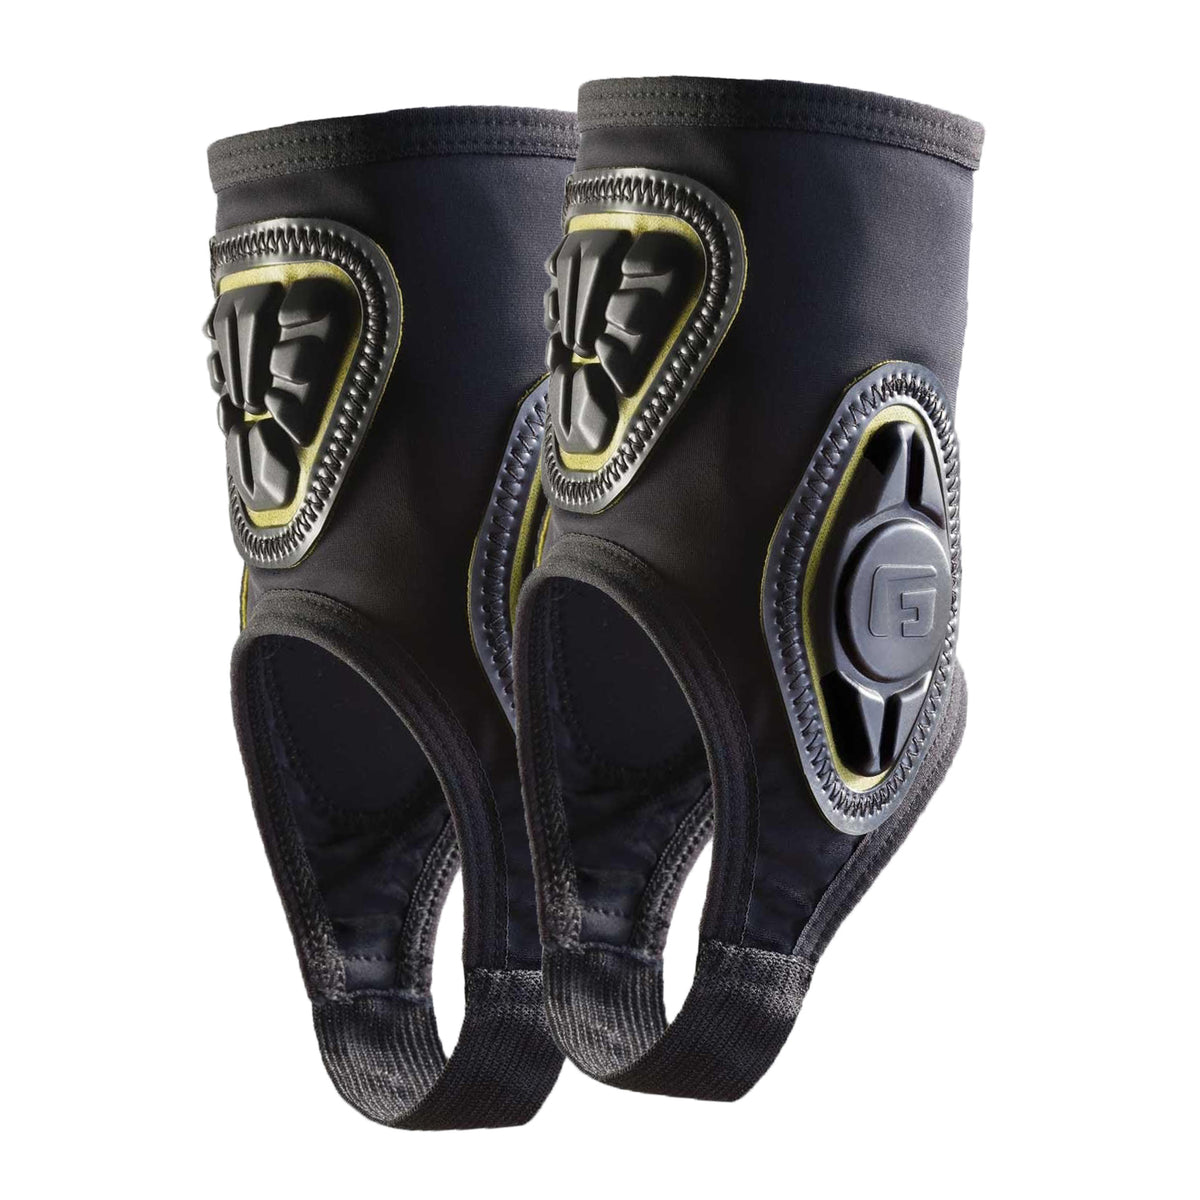 G-Form Pro Ankle Guard